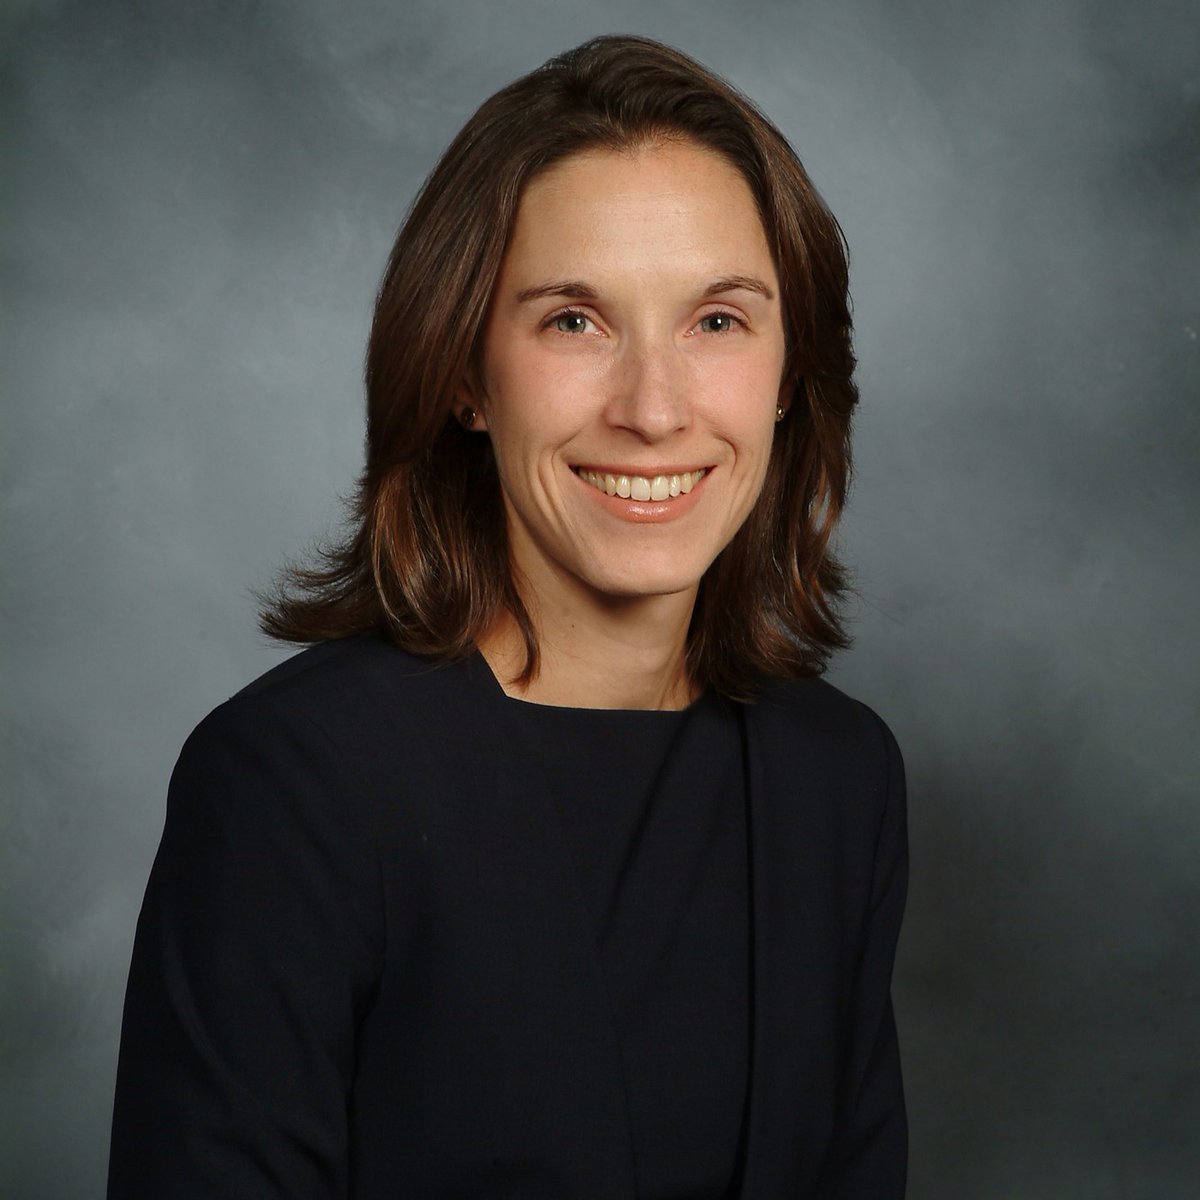 Dr. Caitlin Hoffman discovered her talent for healing when she worked with animals as a teen. Learn how Dr. Hoffman's passion for working with her hands led her to becoming a pediatric neurosurgeon with @WCMNeurosurgery: bit.ly/4cMxefY